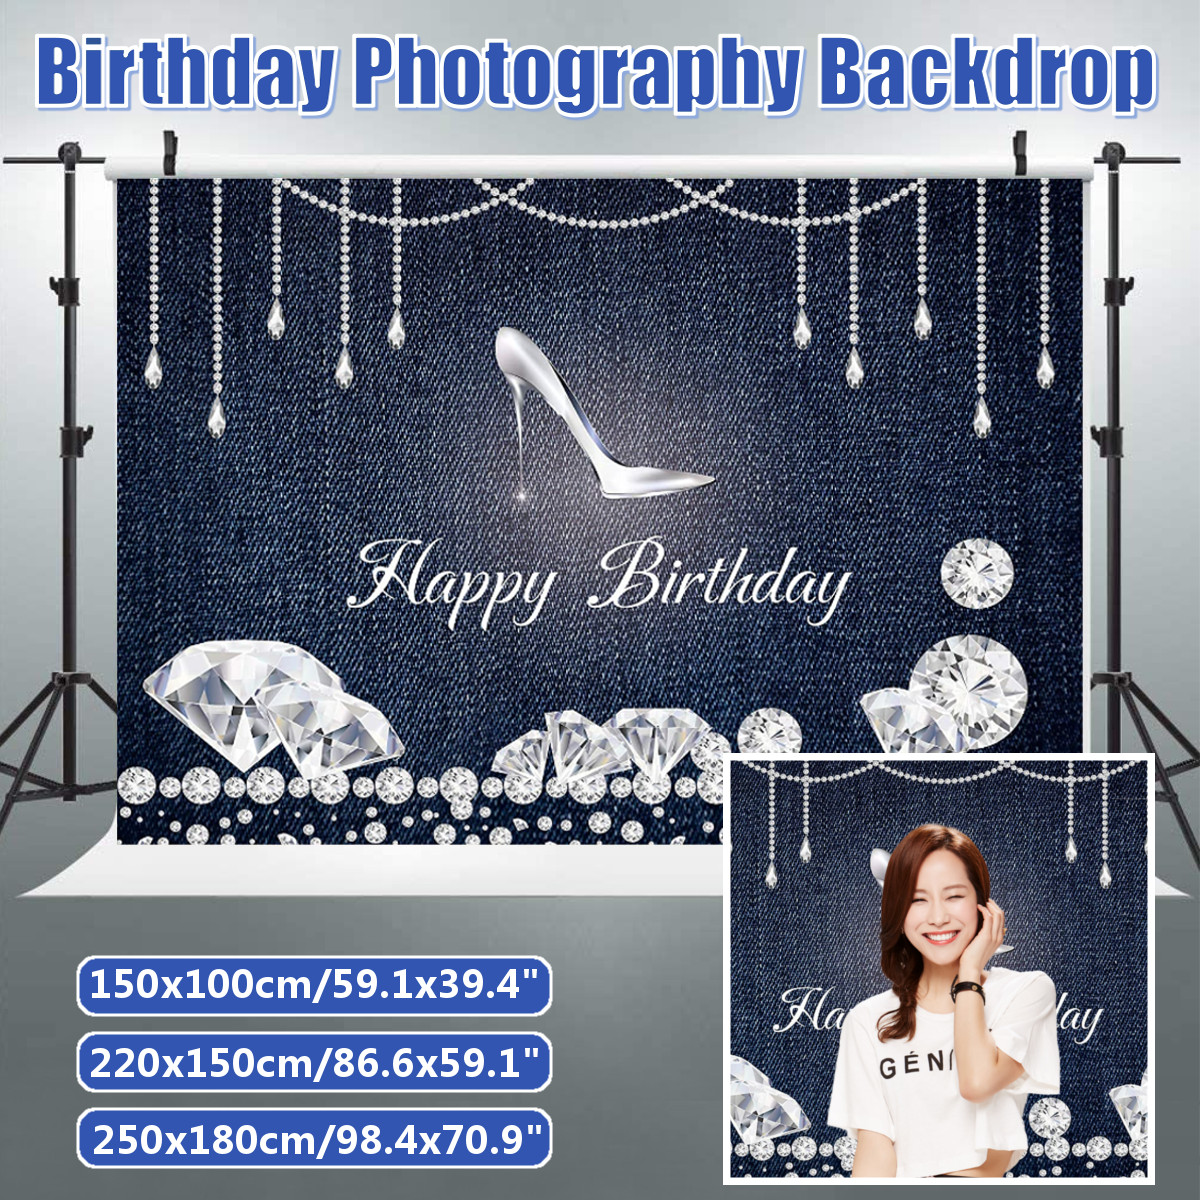 Happy-Birthday-Photography-Backdrop-Photo-Background-Studio-Home-Party-Decor-Props-1821552-1